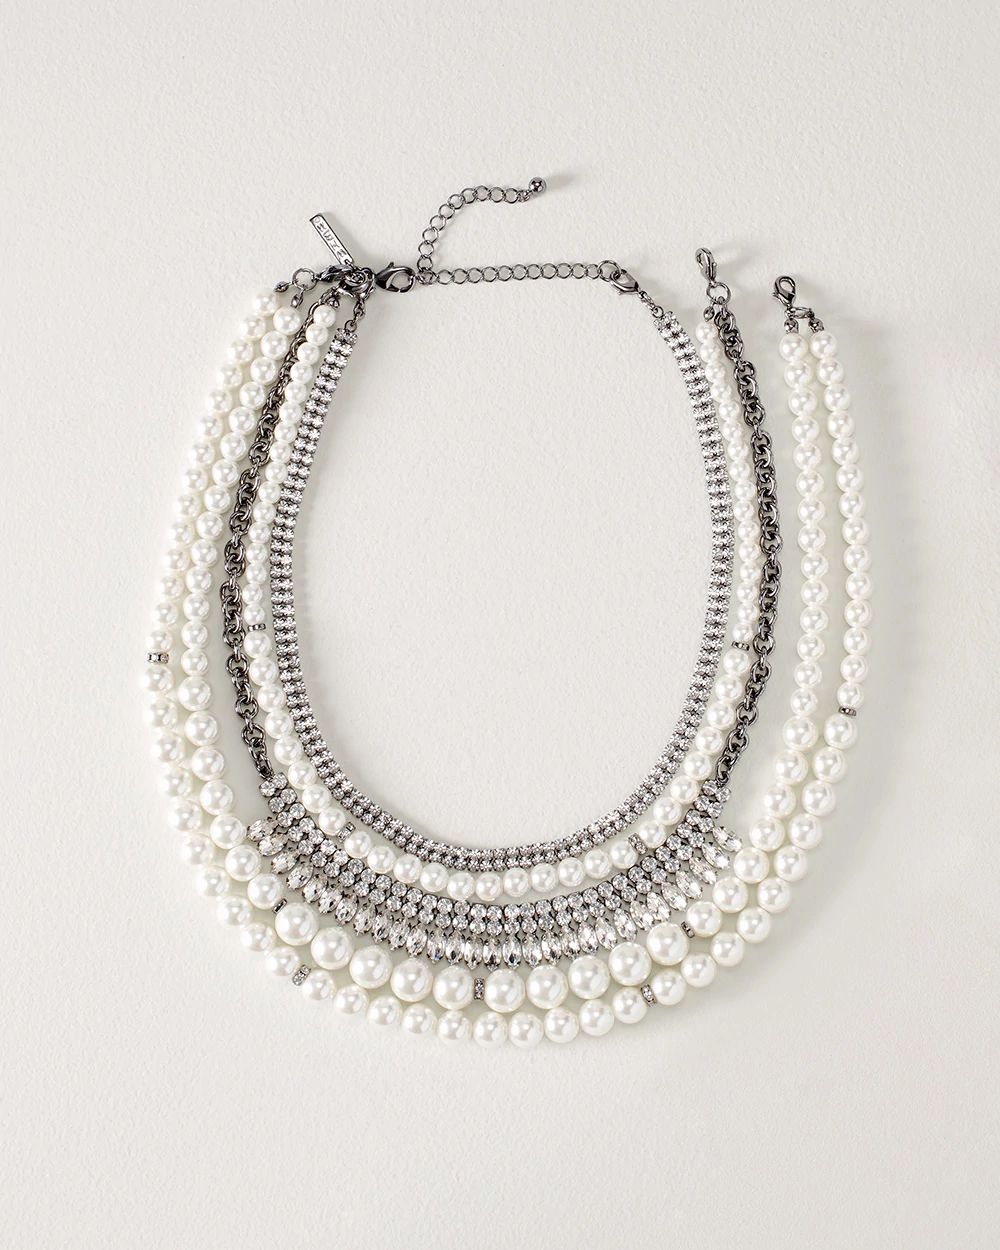 Pearl Convertible Multi-Strand Necklace click to view larger image.